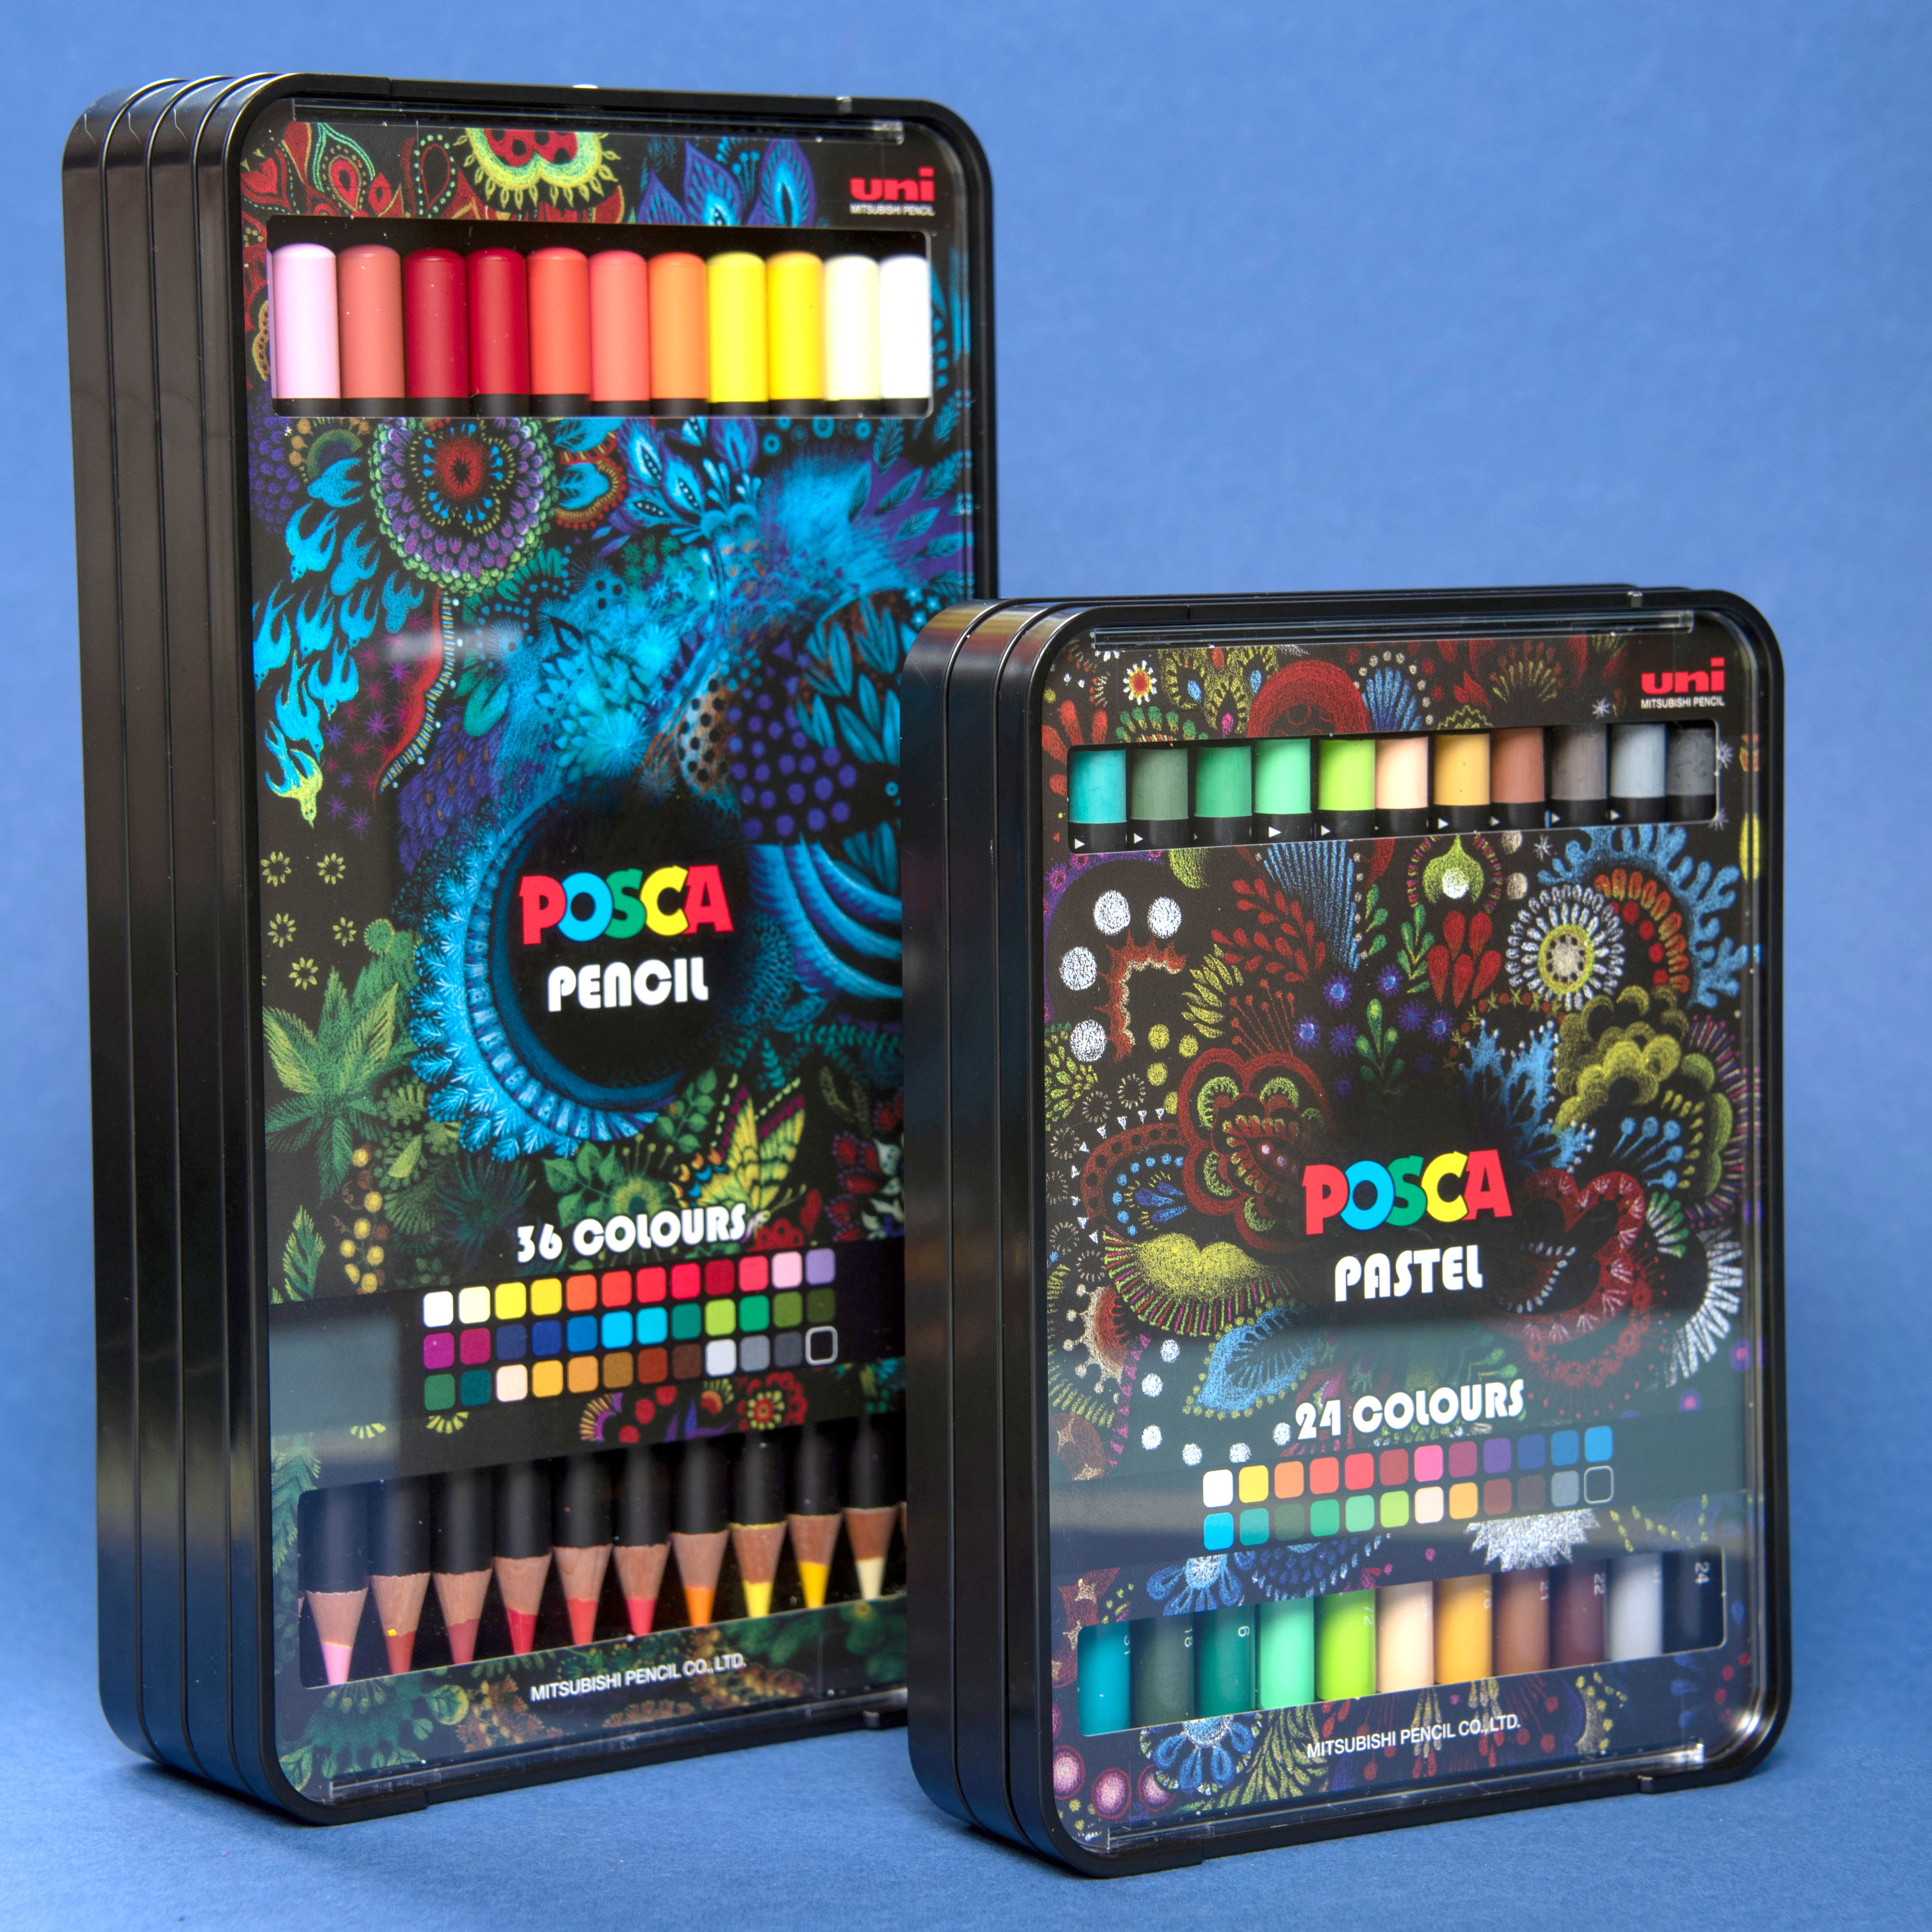 uni-ball on X: POSCA Pencils and Pastels are now available! Take your art  to new dimensions of colour and creativity! Available from;    #POSCAPencils #POSCAart  #POSCAPastels #POSCAColours #MyPOSCAArt